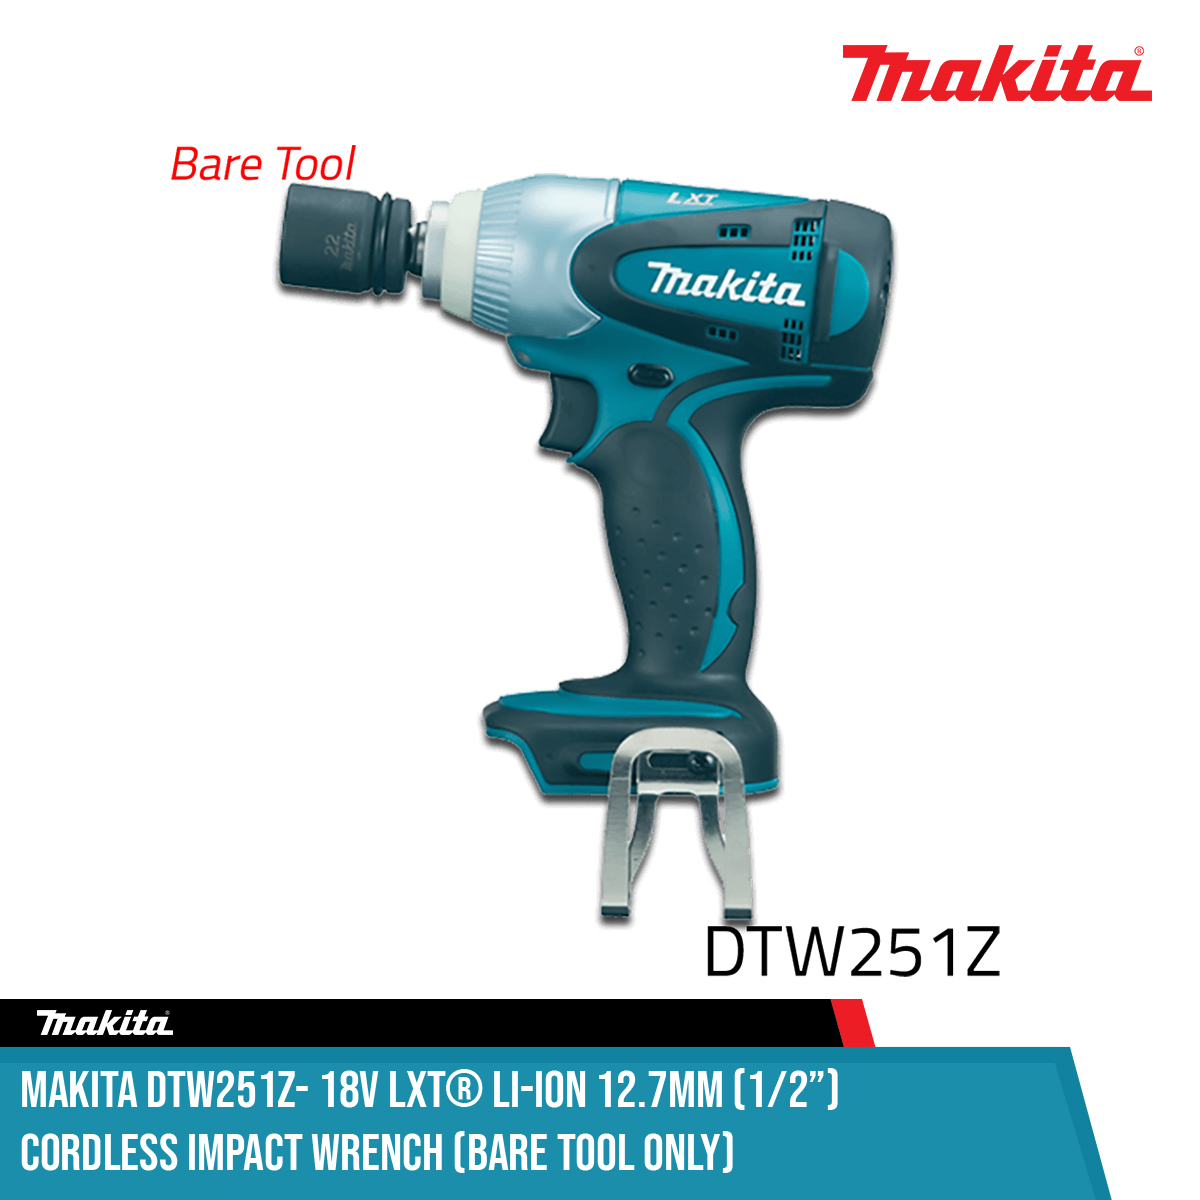 MAKITA DTW251Z- 18V LXT® Li-Ion 12.7mm (1/2") Cordless Wrench (BARE TOOL ONLY) | Lazada PH